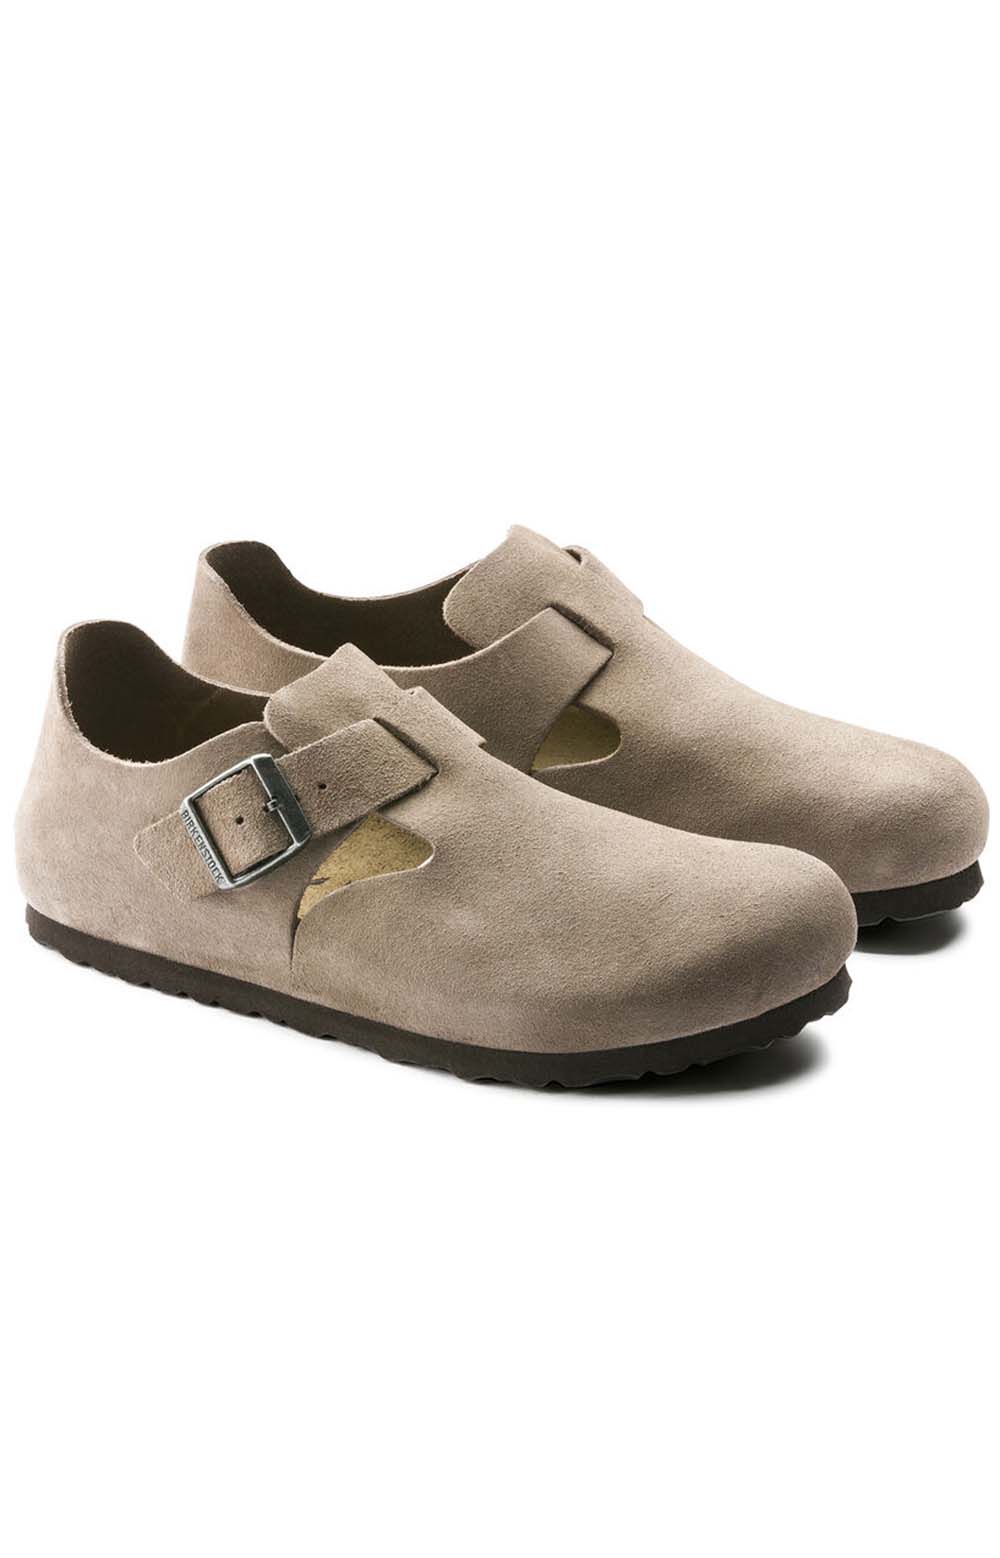 (1010503) London Shoes - Taupe